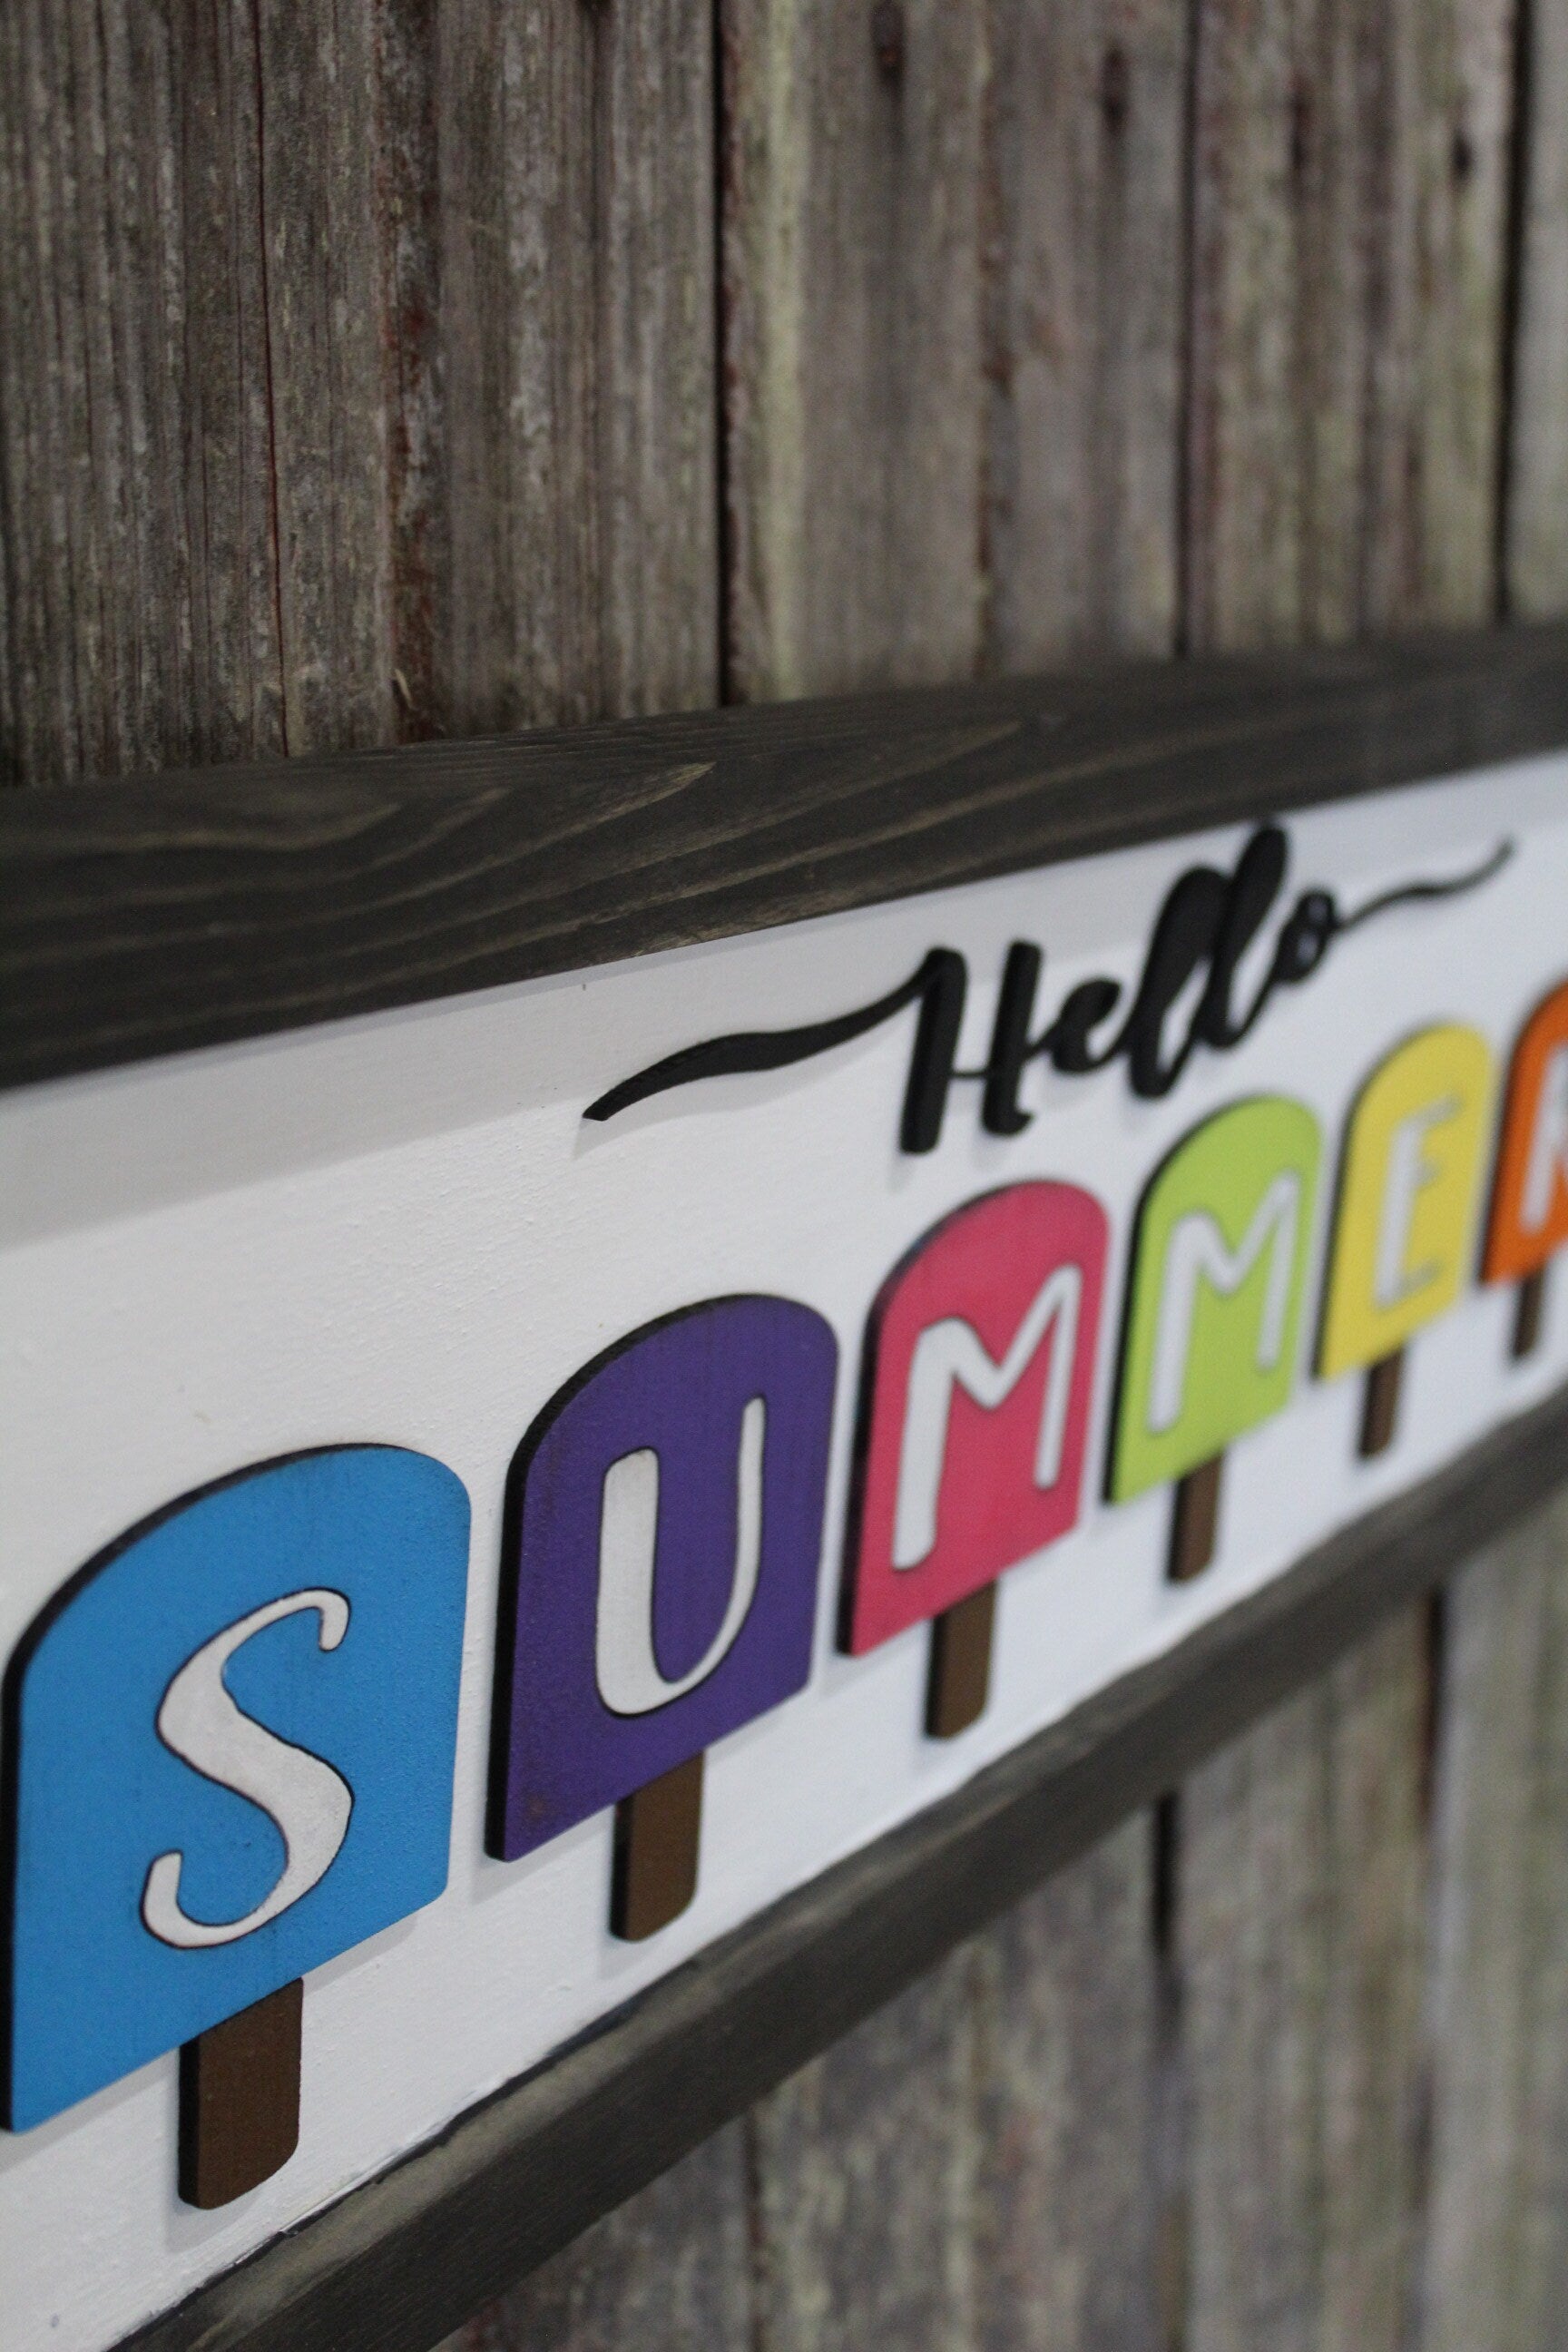 Hello Summer Wood Sign 3D Raised Text Image Bright Popsicles Ice Pops Ice Cream Fun Farmhouse Handmade Sign Rustic Primitive